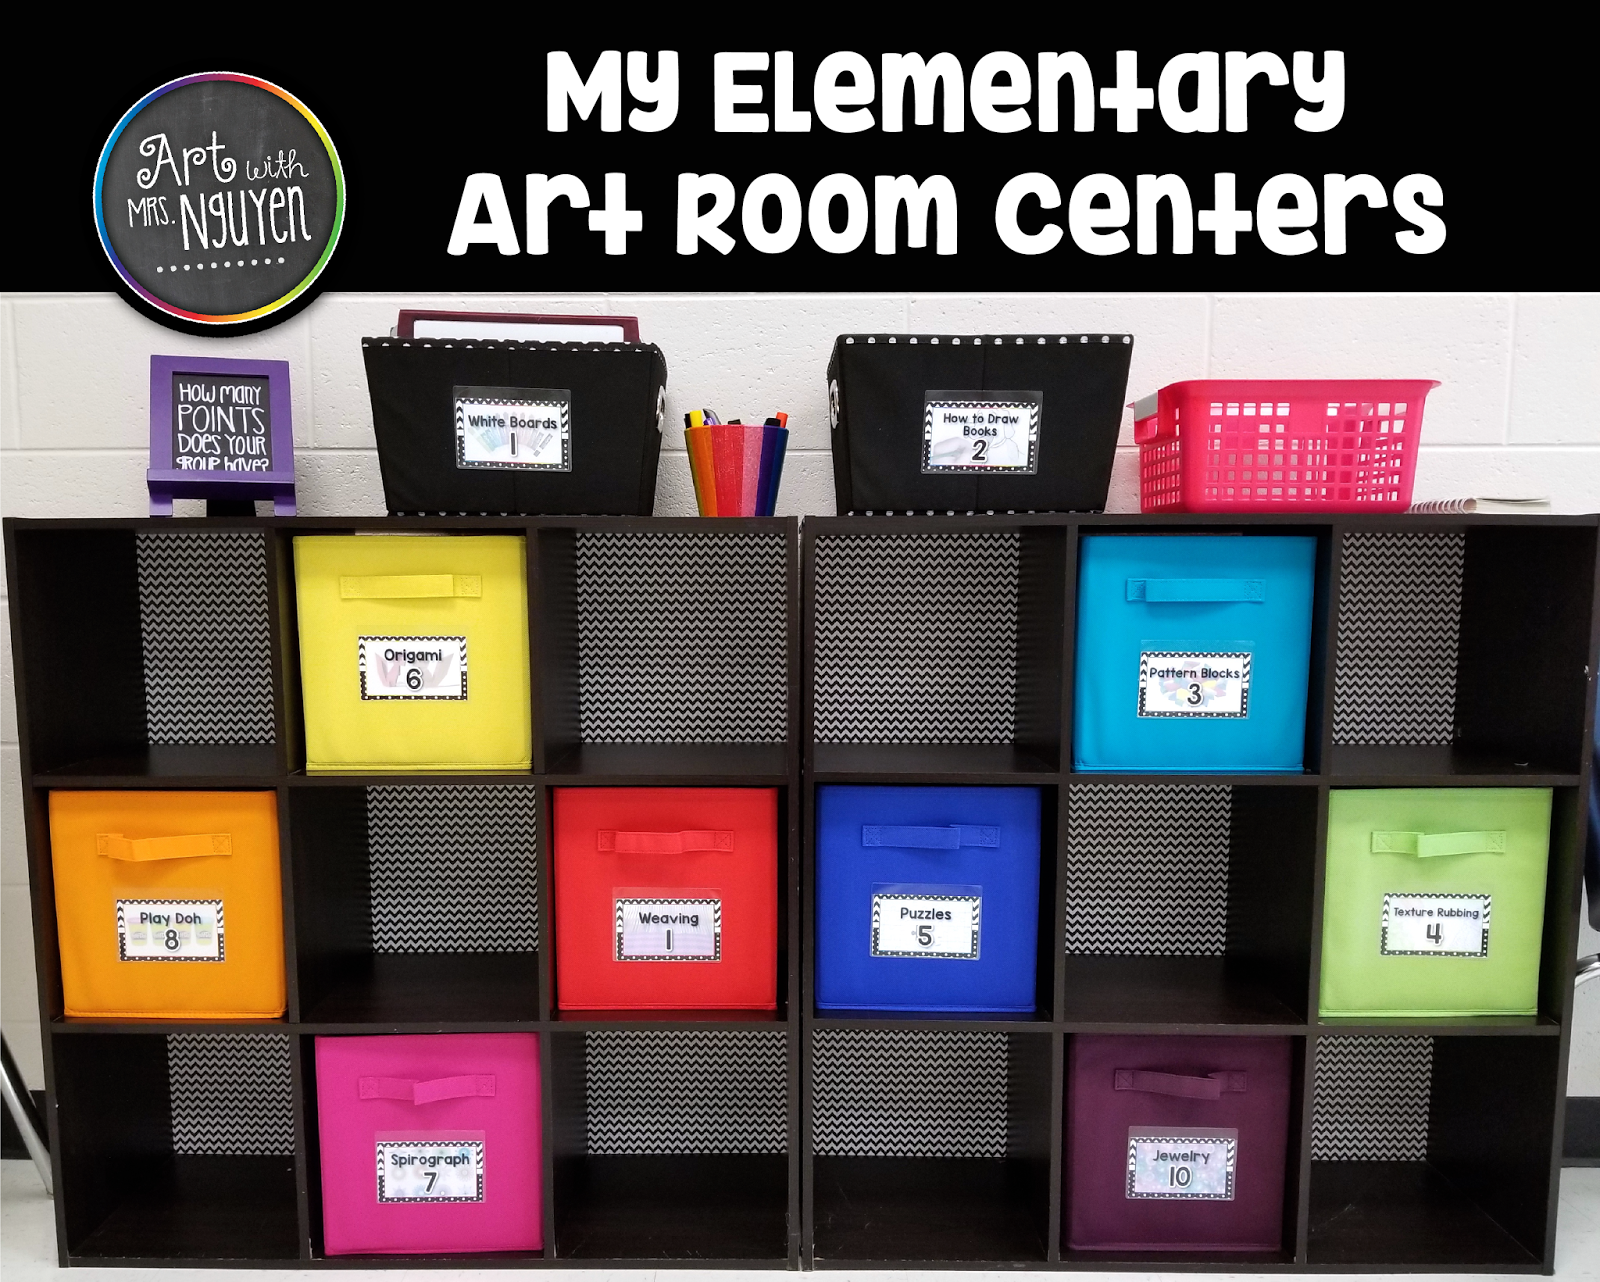 Using Picture Books in the Elementary Art Room